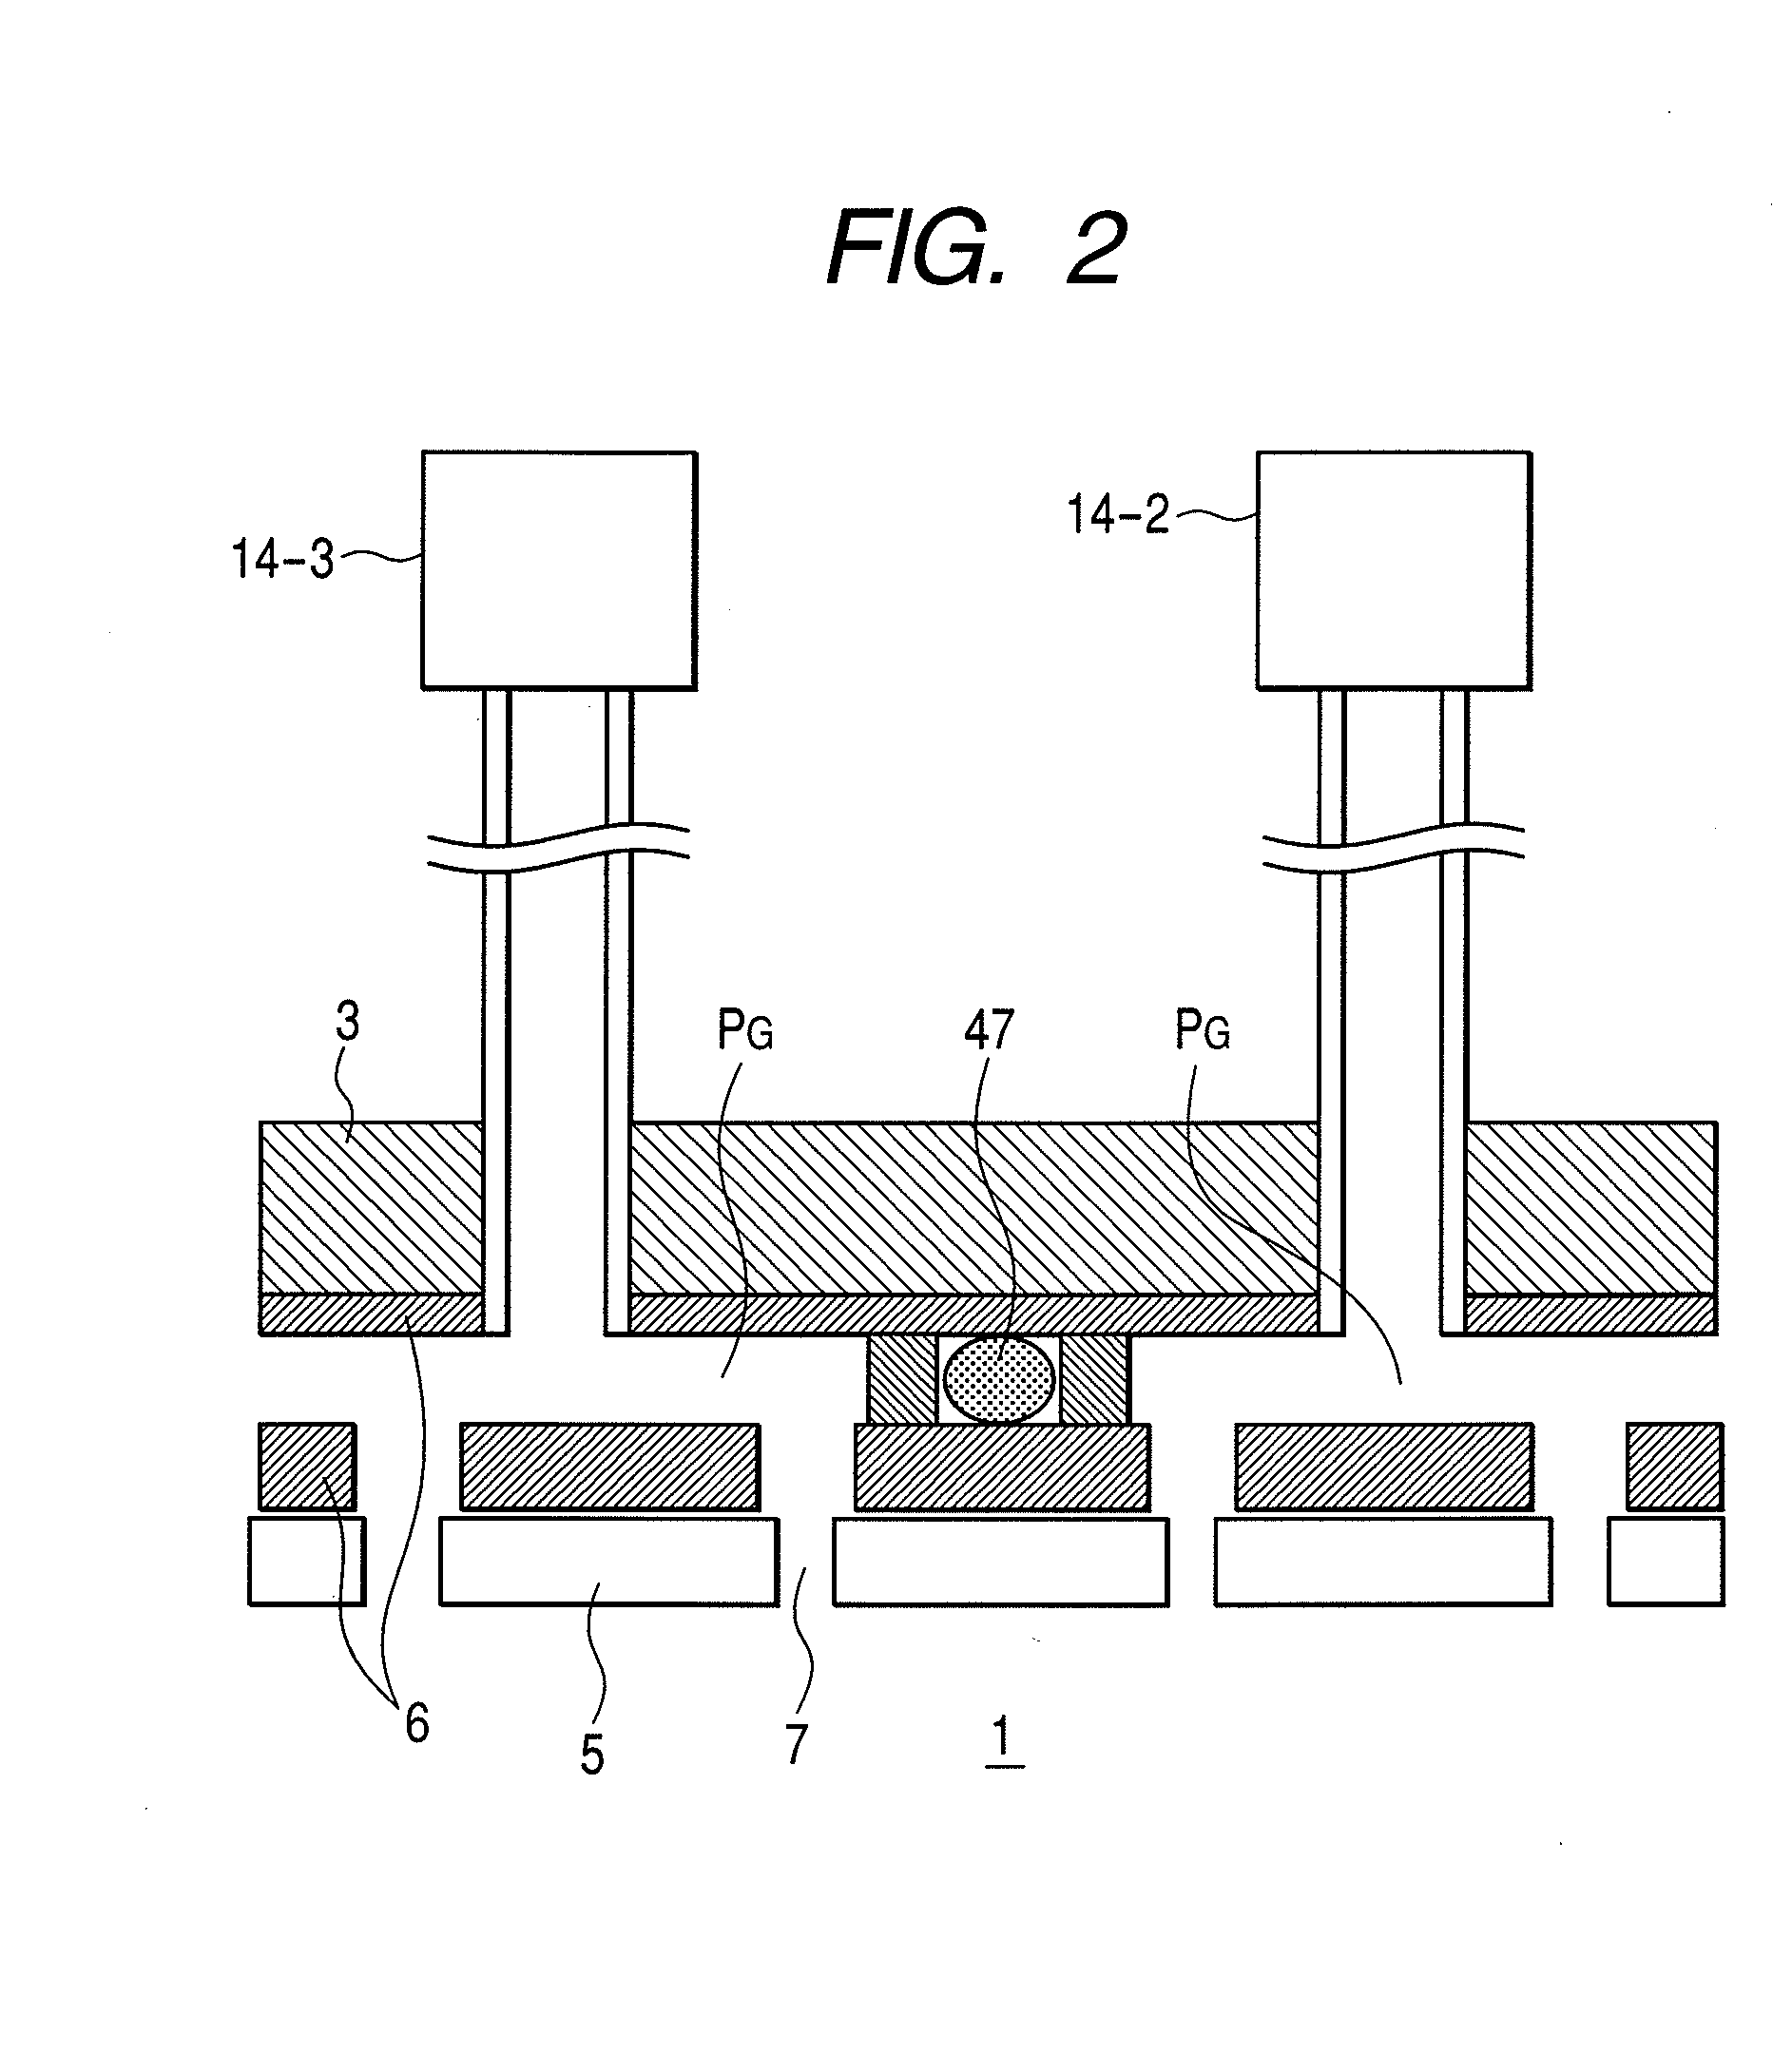 Plasma Processing Apparatus and Method for Venting the Same to Atmosphere